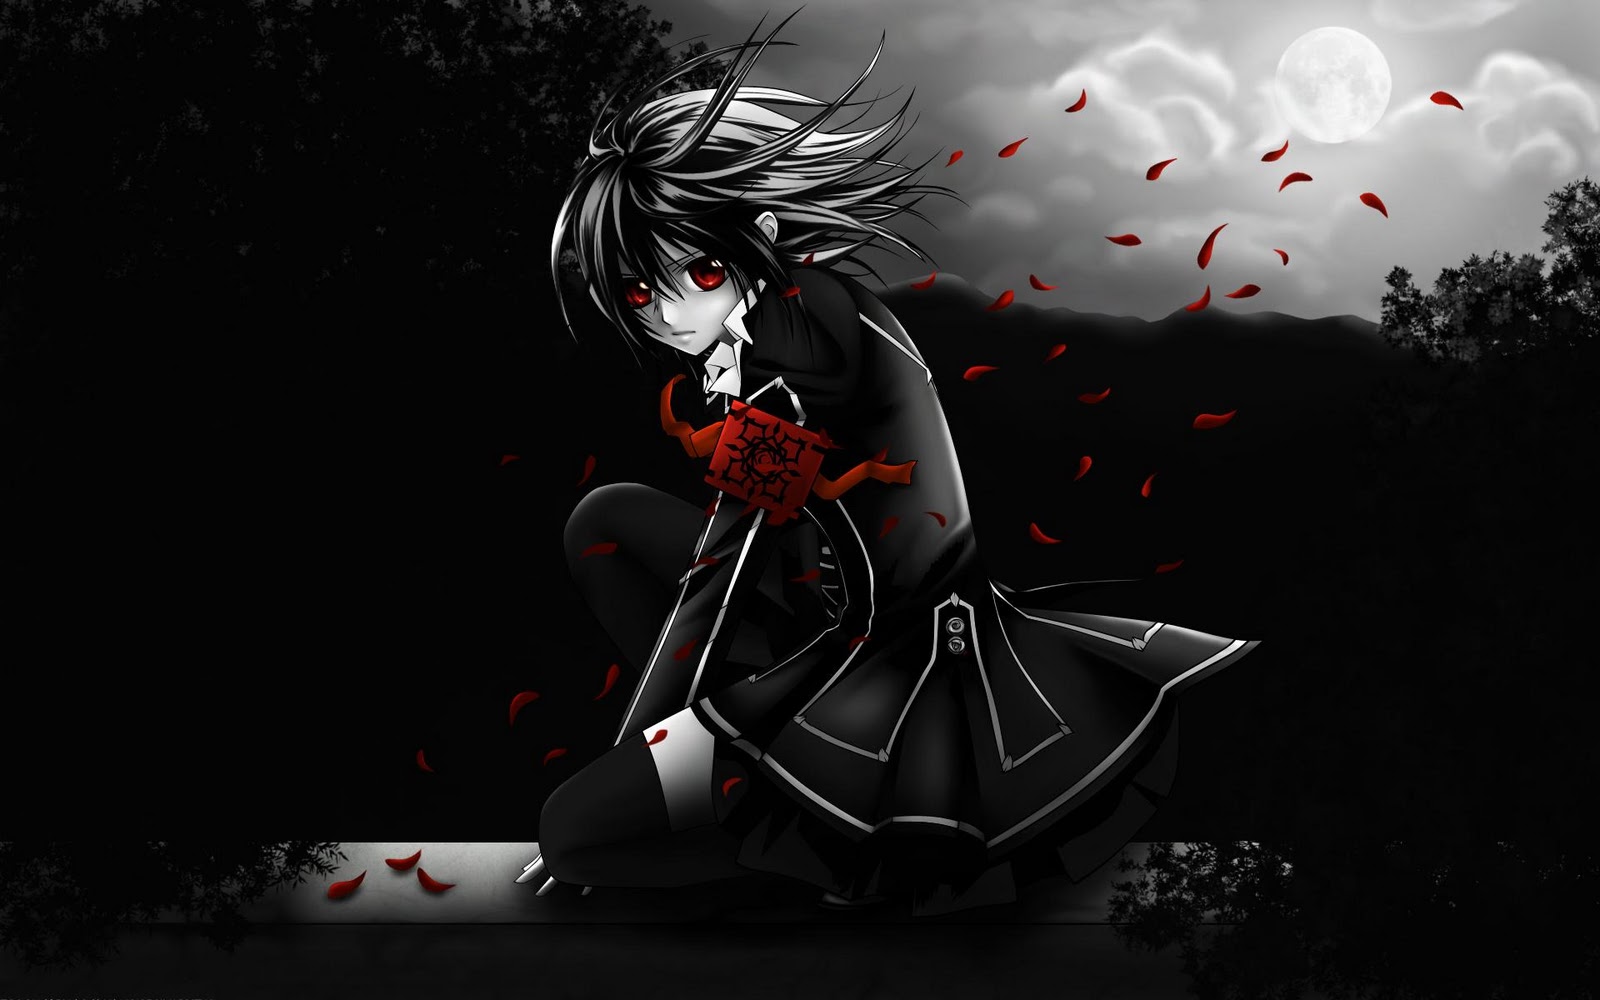 Emo HD Wallpapers Emo HD Wallpapers Check out the cool latest Emo 1600x1000